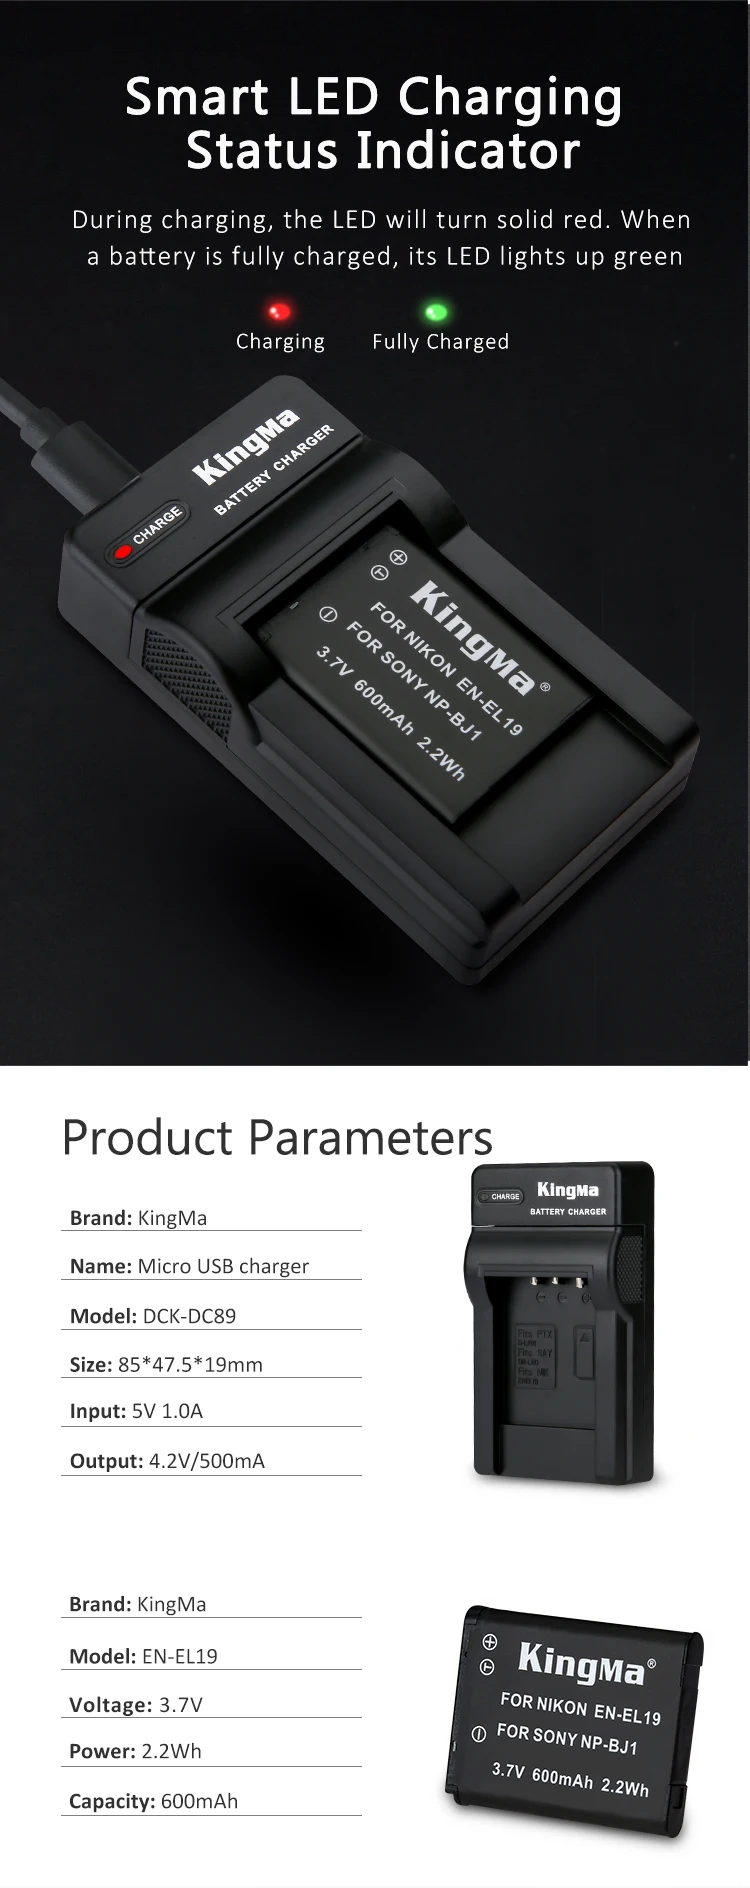 Kingma En El19 600mah Battery And Single Fast Charger For Nikon S2500 S2600 S3100 S4100 Camera View En El19 Battery Kingma Product Details From Shenzhen Kingma Electronics Co Limited On Alibaba Com